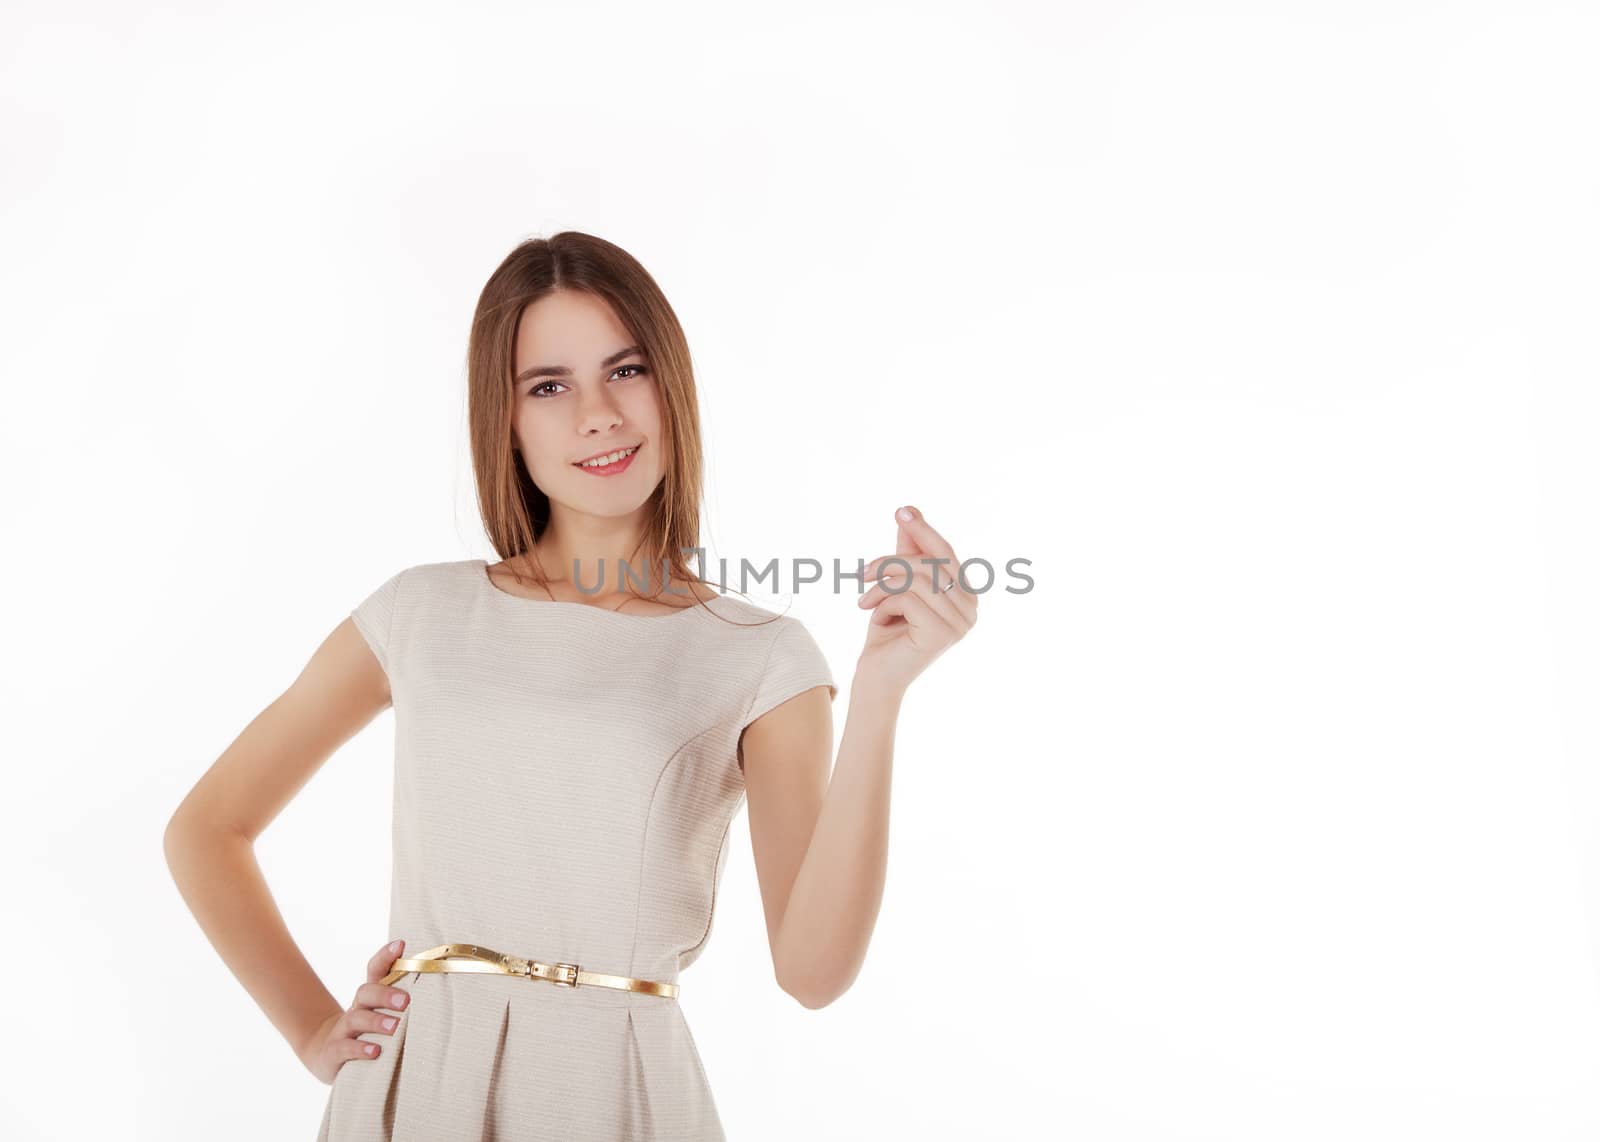 young beautiful girl in a bright dress holding an imaginary credit card